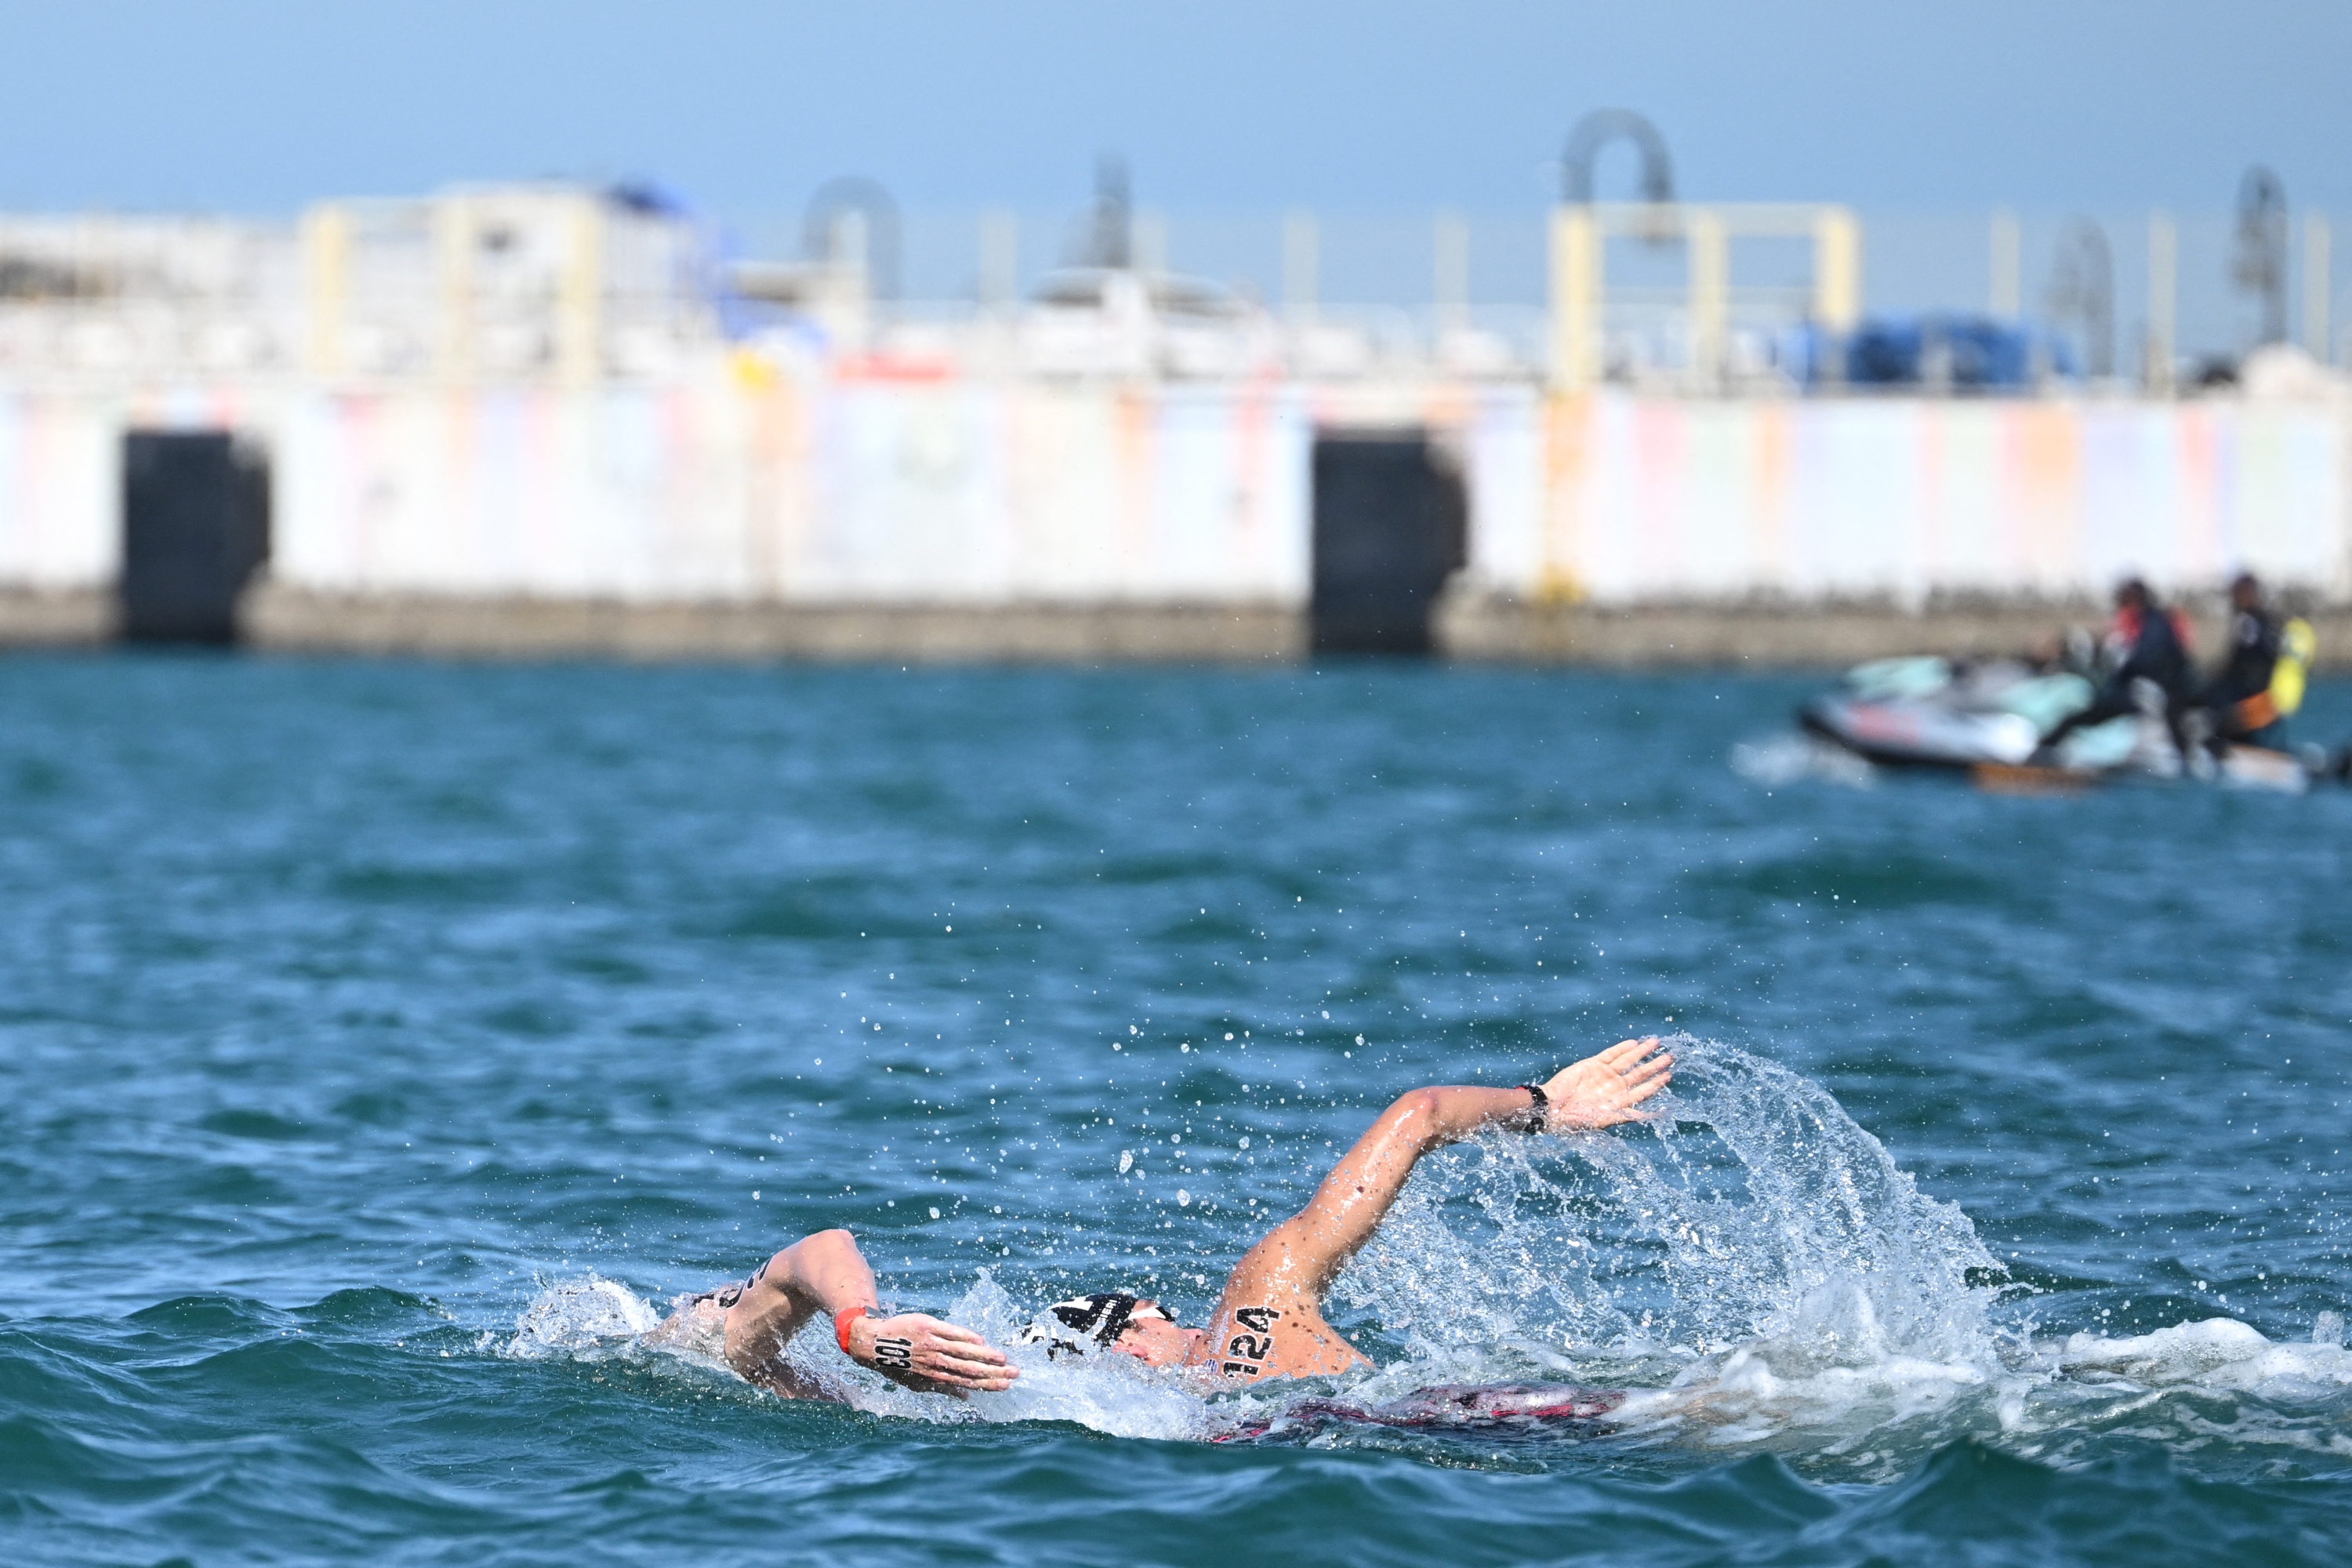 Germany's Florian Wellbrock and Italy's Gregorio Paltrinieri compete in the final of the men's 5km open water swimming event during the 2024 World Aquatics Championships at Doha Port in Doha on February 7, 2024. (Photo by Manan VATSYAYANA / AFP)